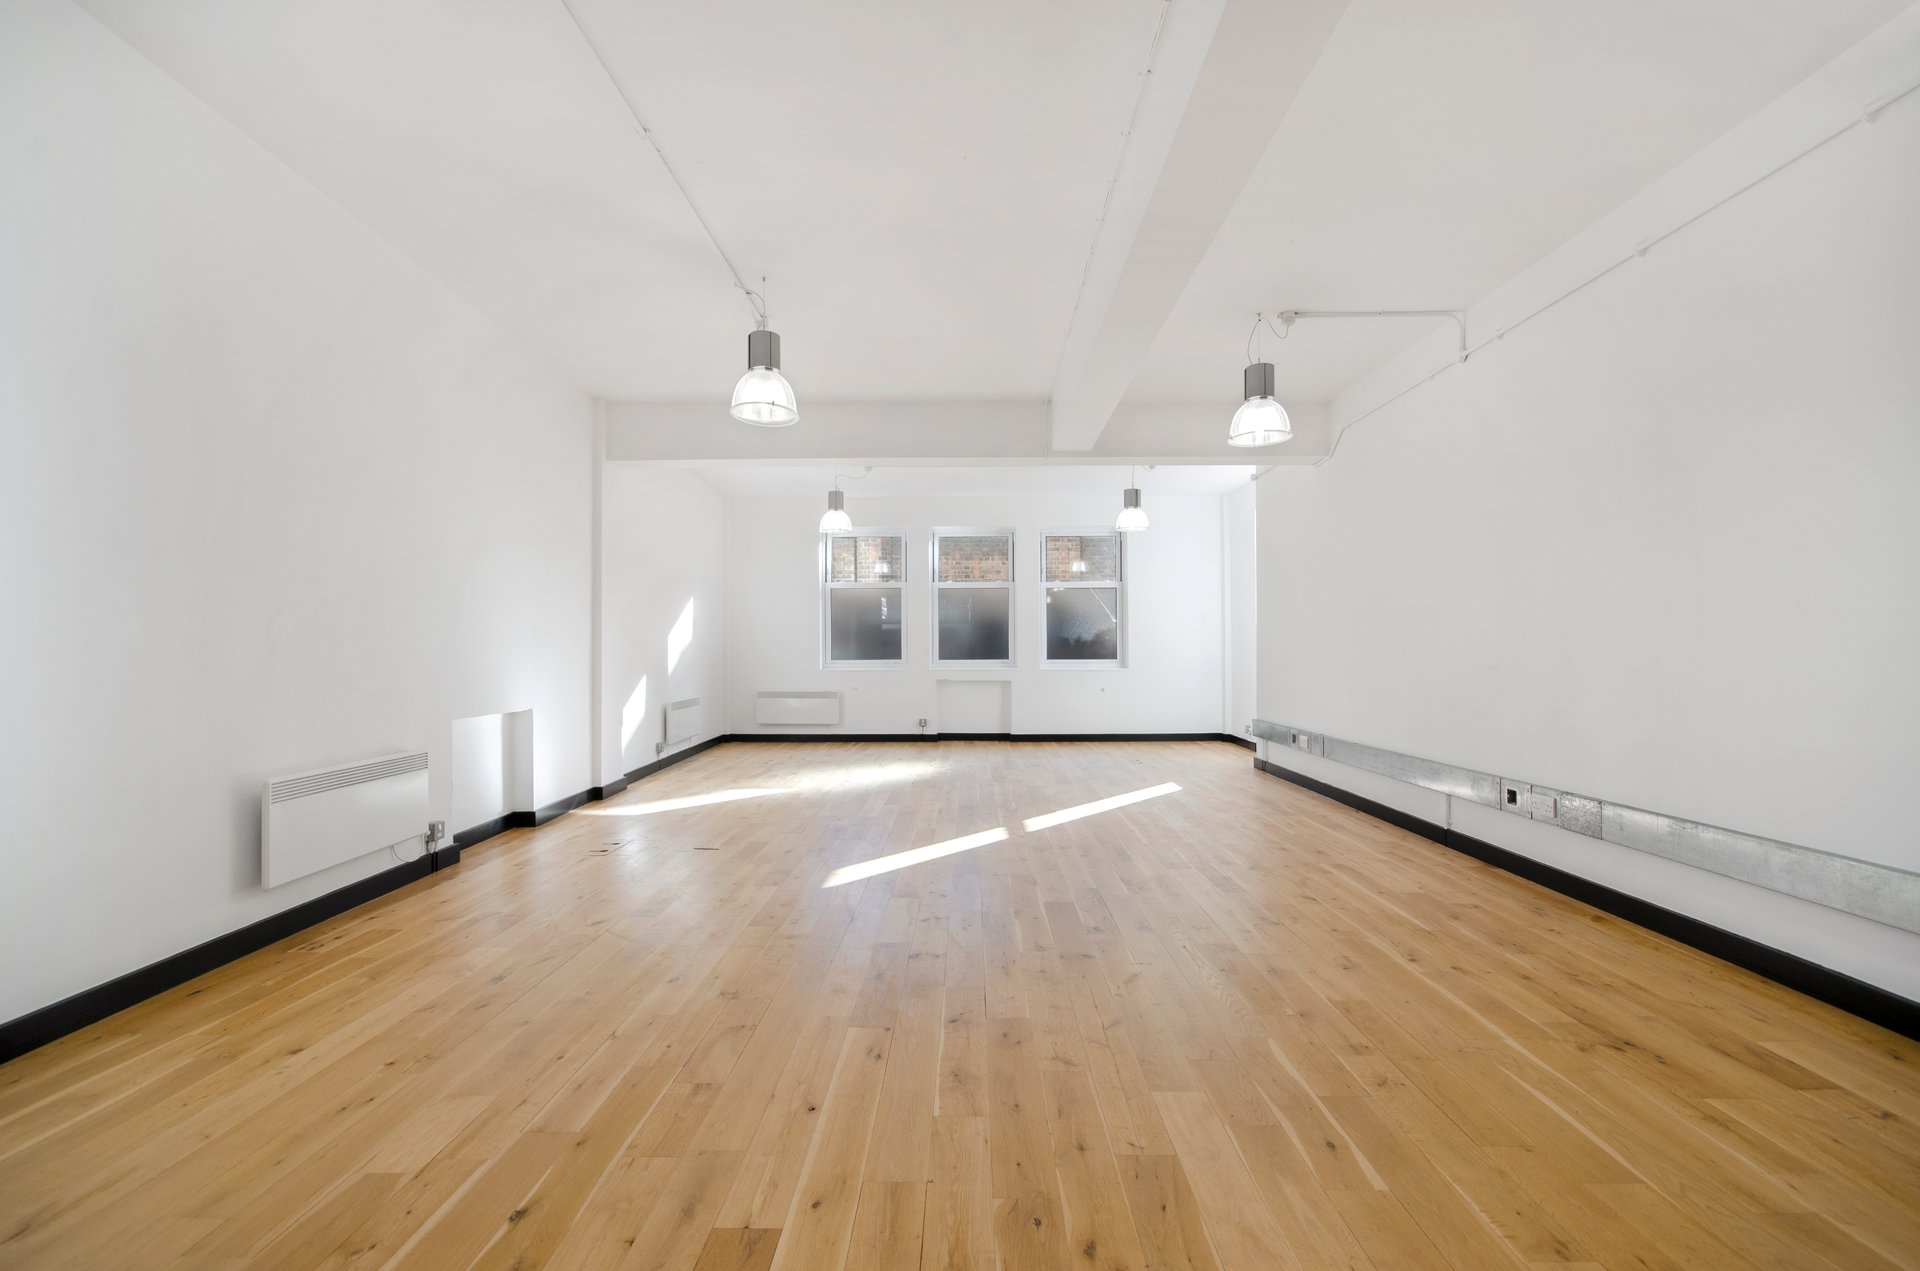 Interior of Workspace - The Shepherds Building